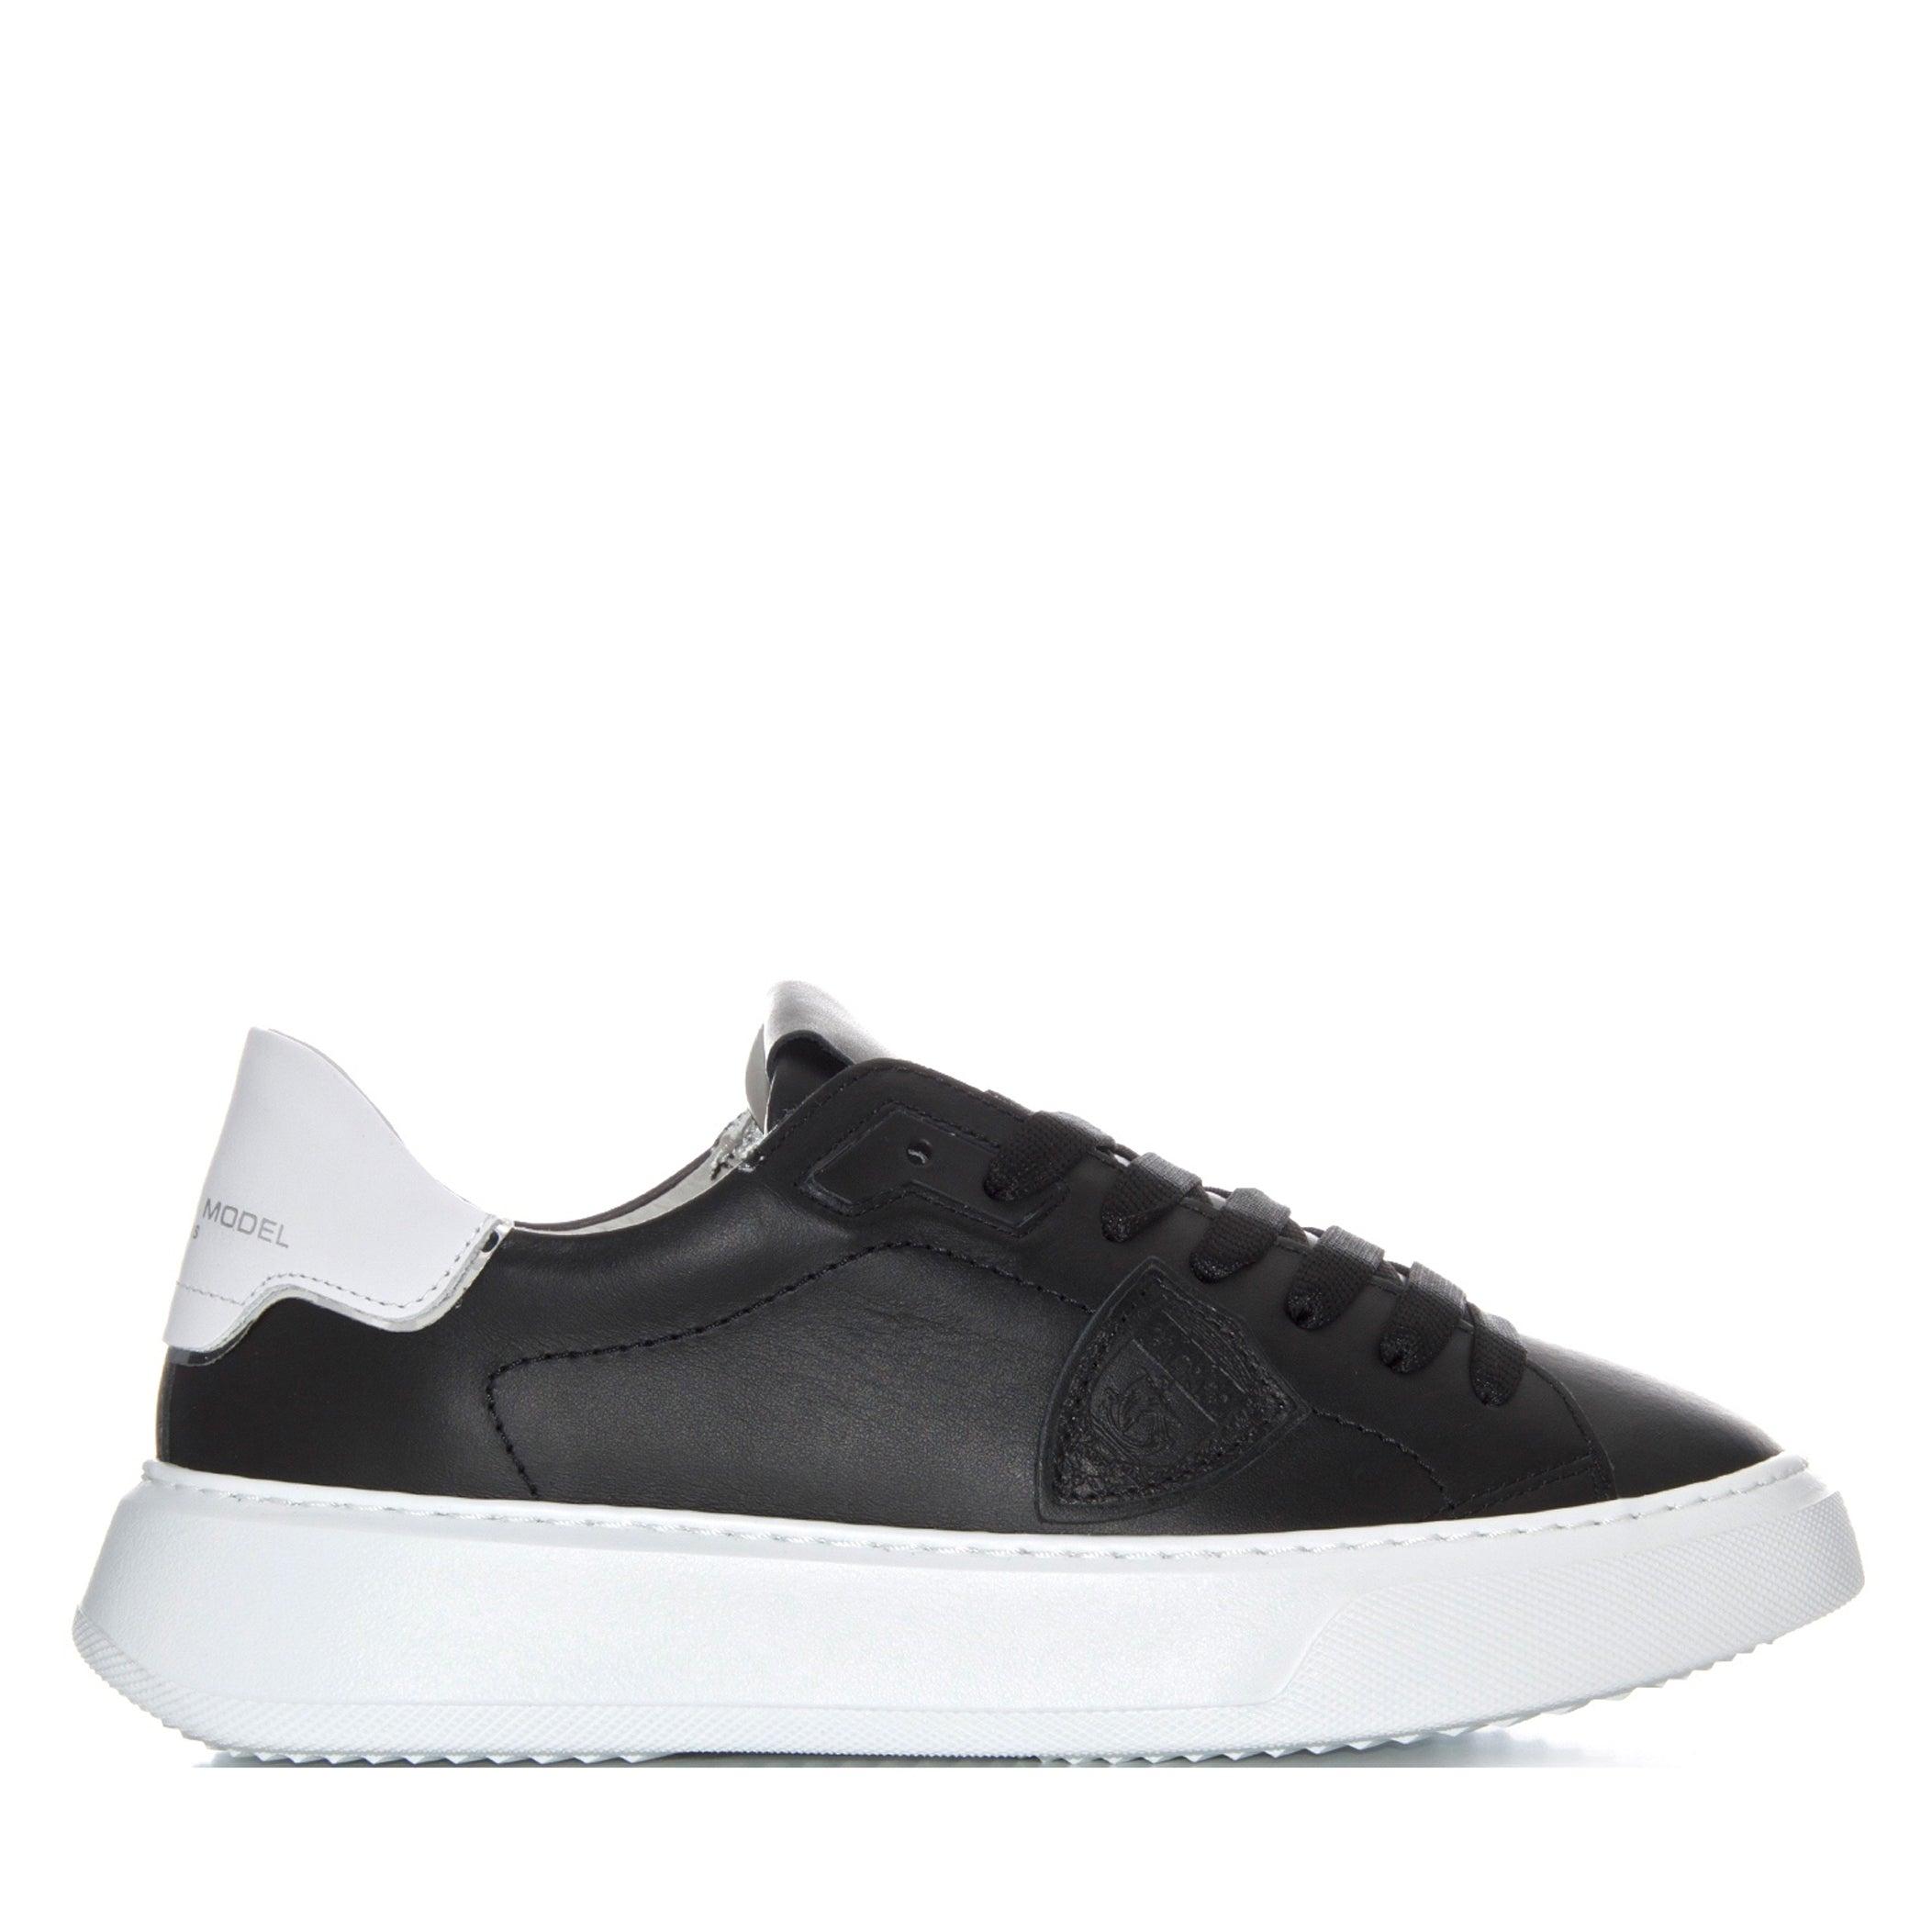 Philippe Model Black Leather Sneakers | Lyst